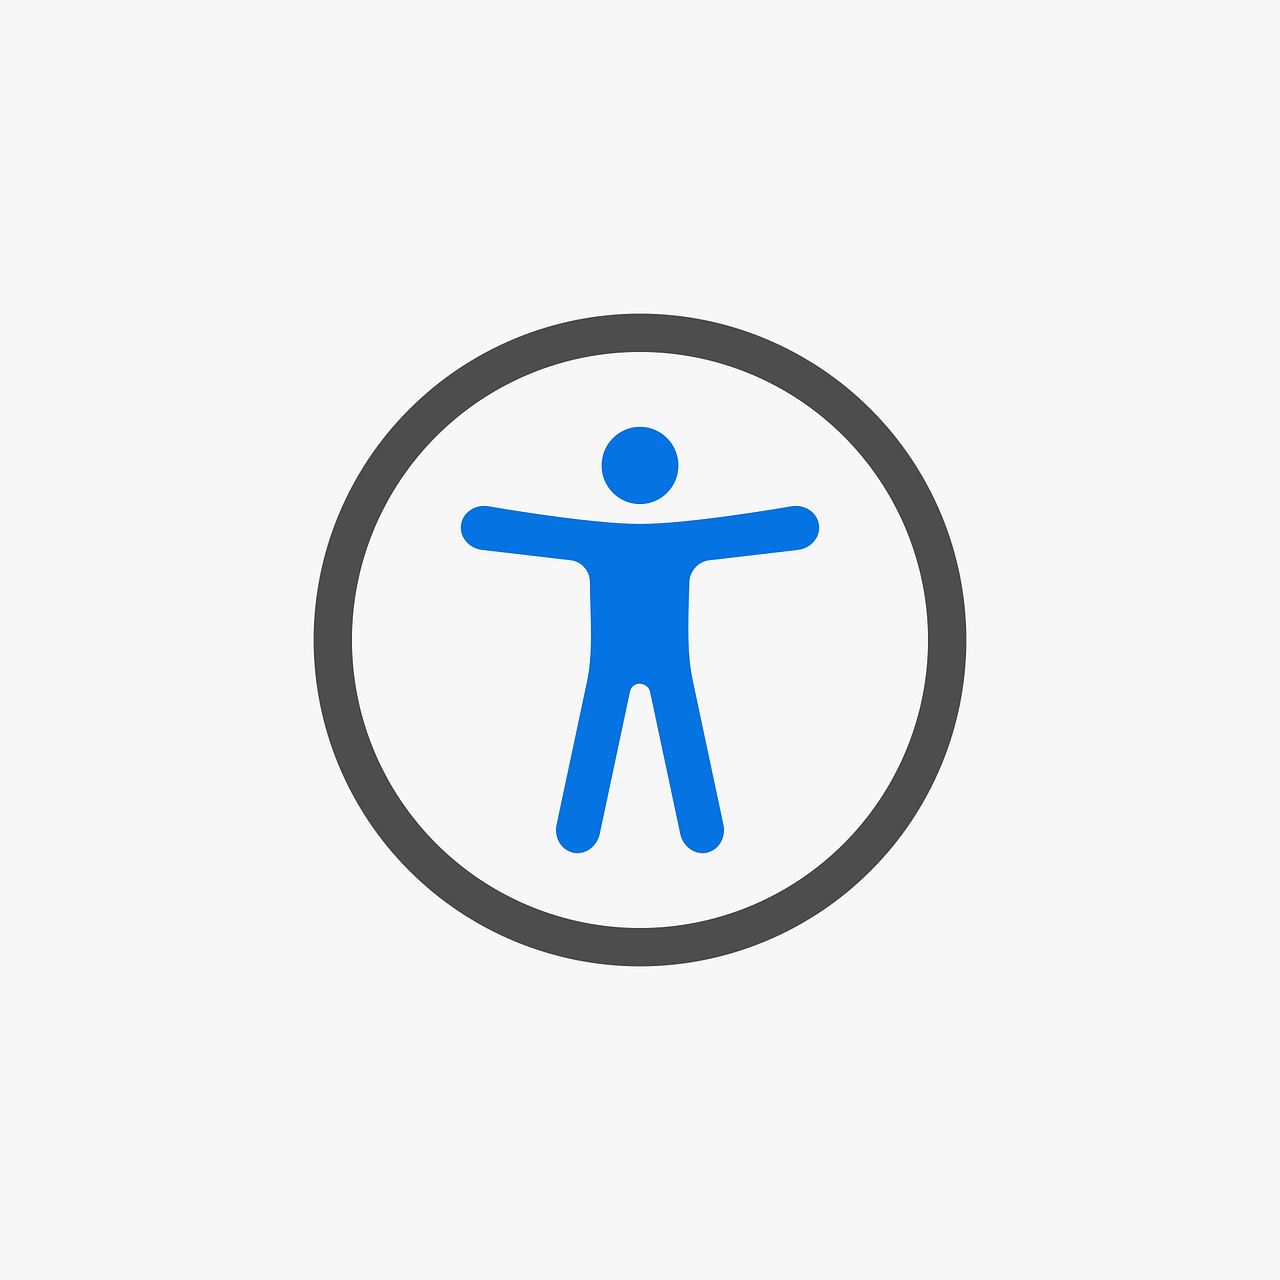 Accessibility logo in which a blue person in an x position is surrounded by a black circle.